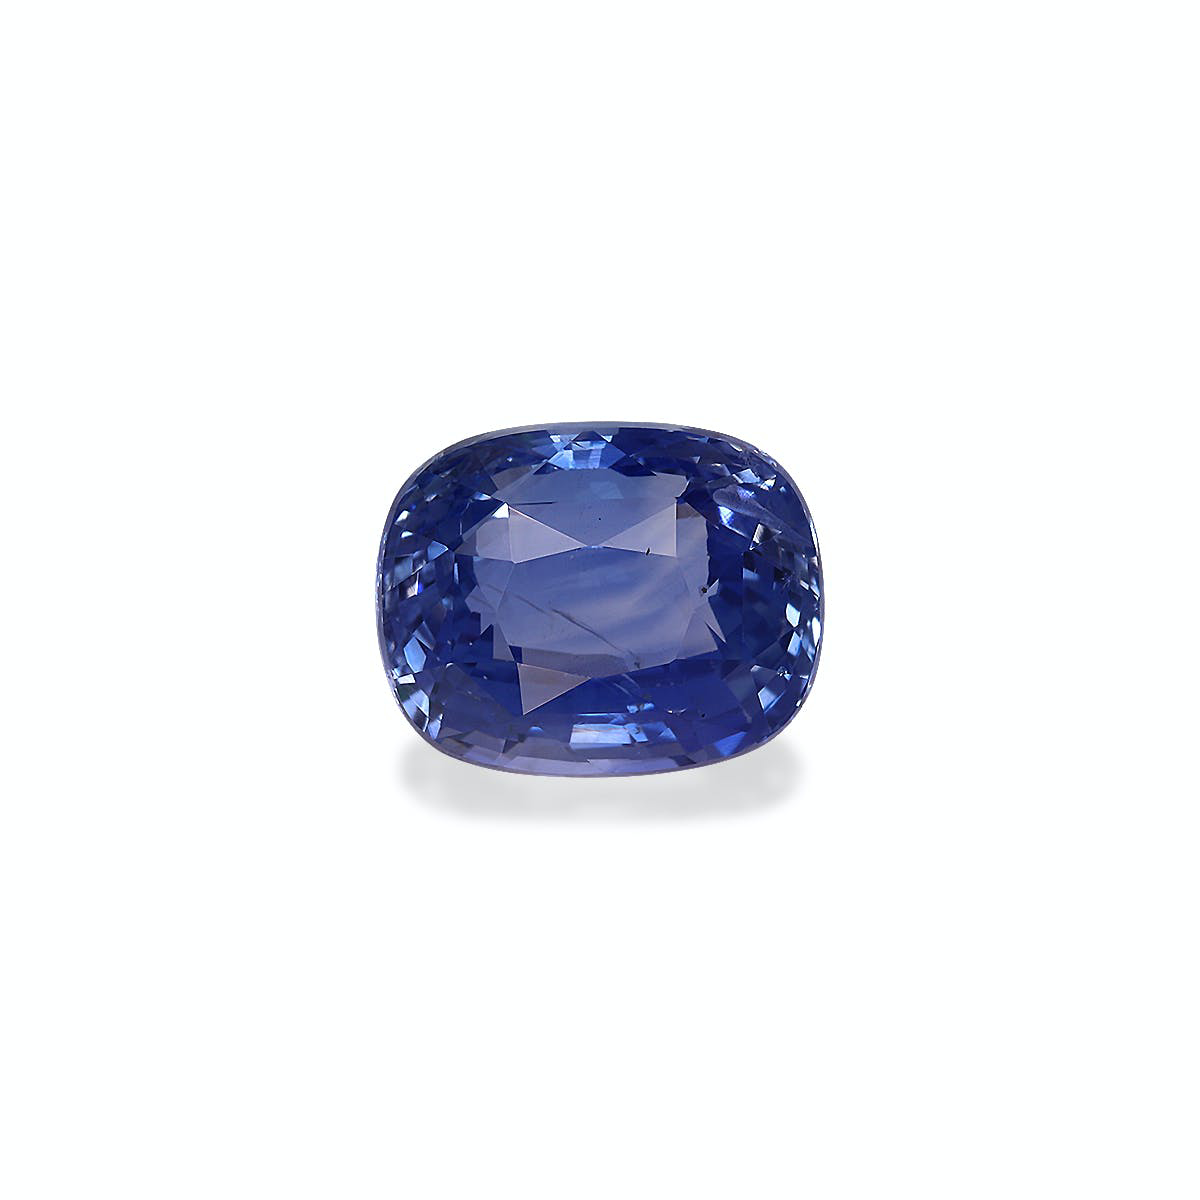 Picture of Blue Sapphire Unheated Sri Lanka 4.07ct - 9x7mm (BS0247)